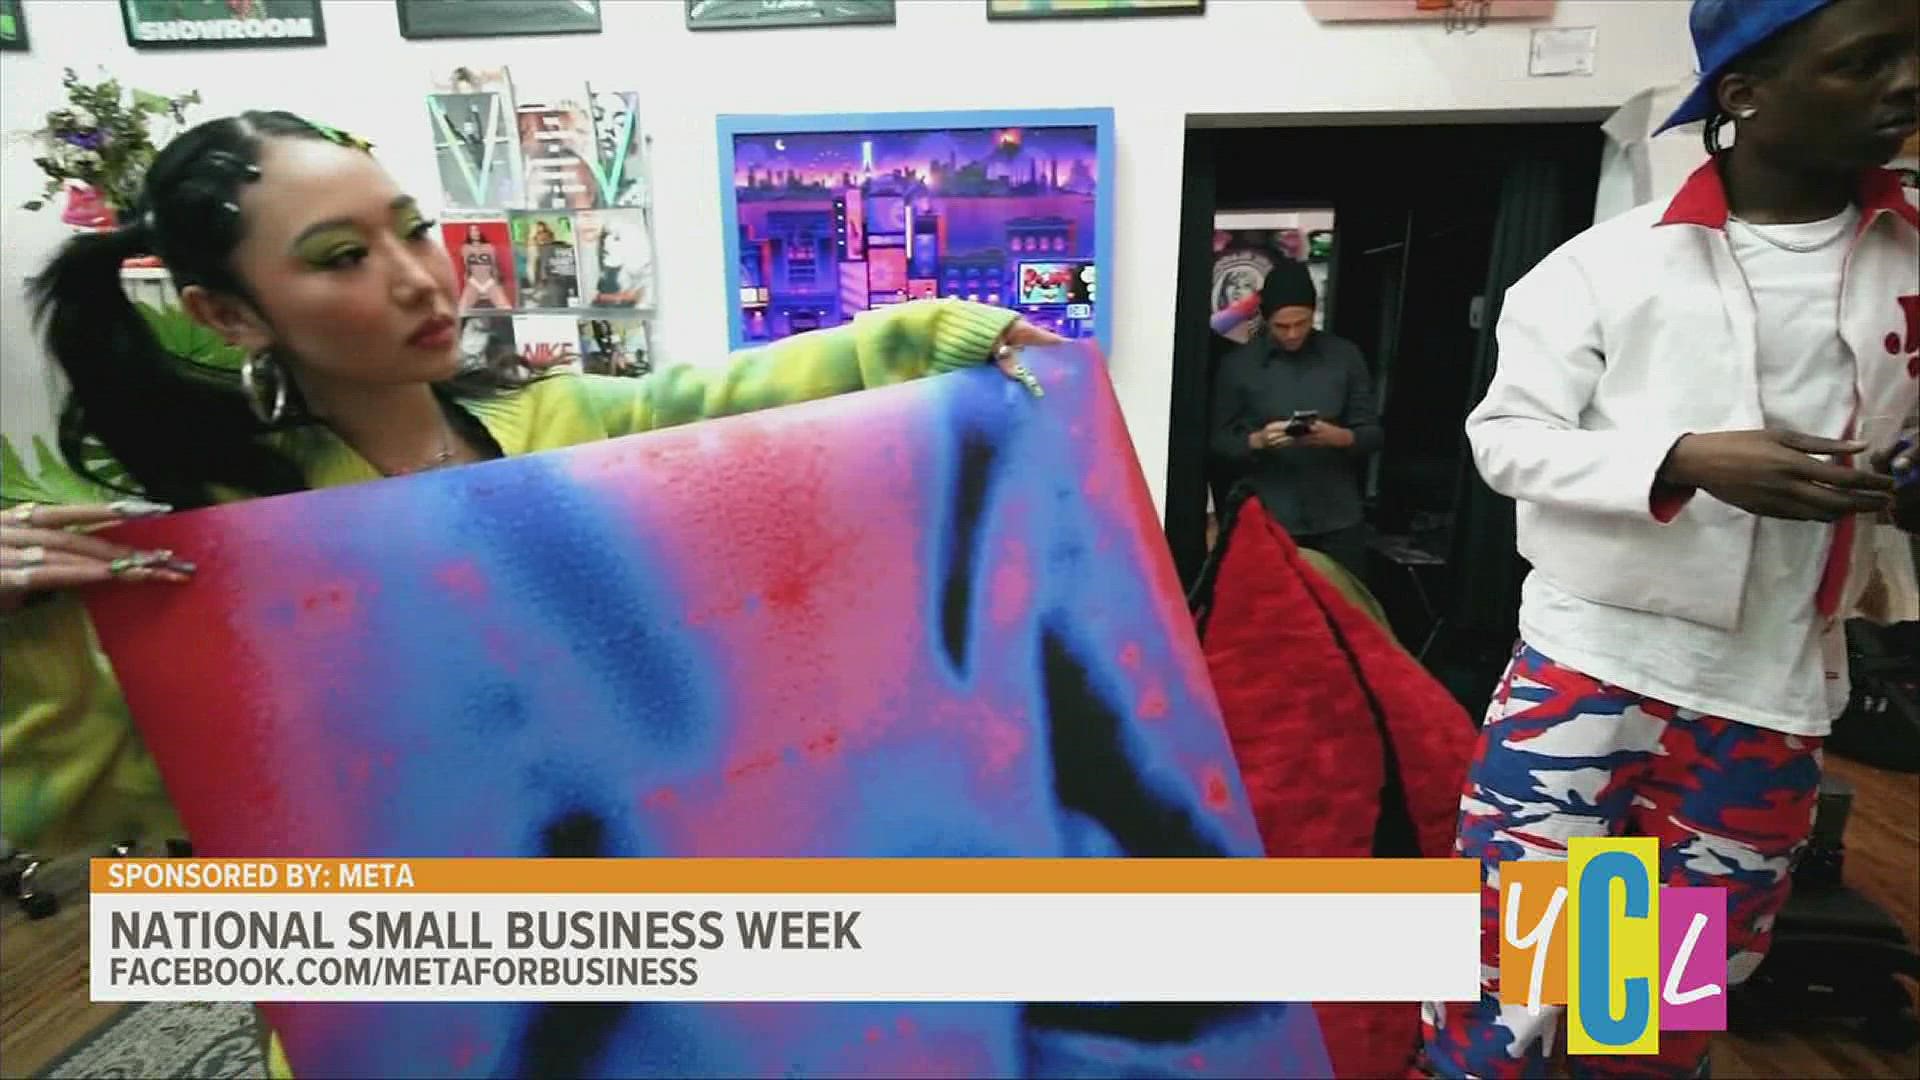 We're celebrating and inspiring local businesses during National Small Business Week. This segment paid for by Meta.